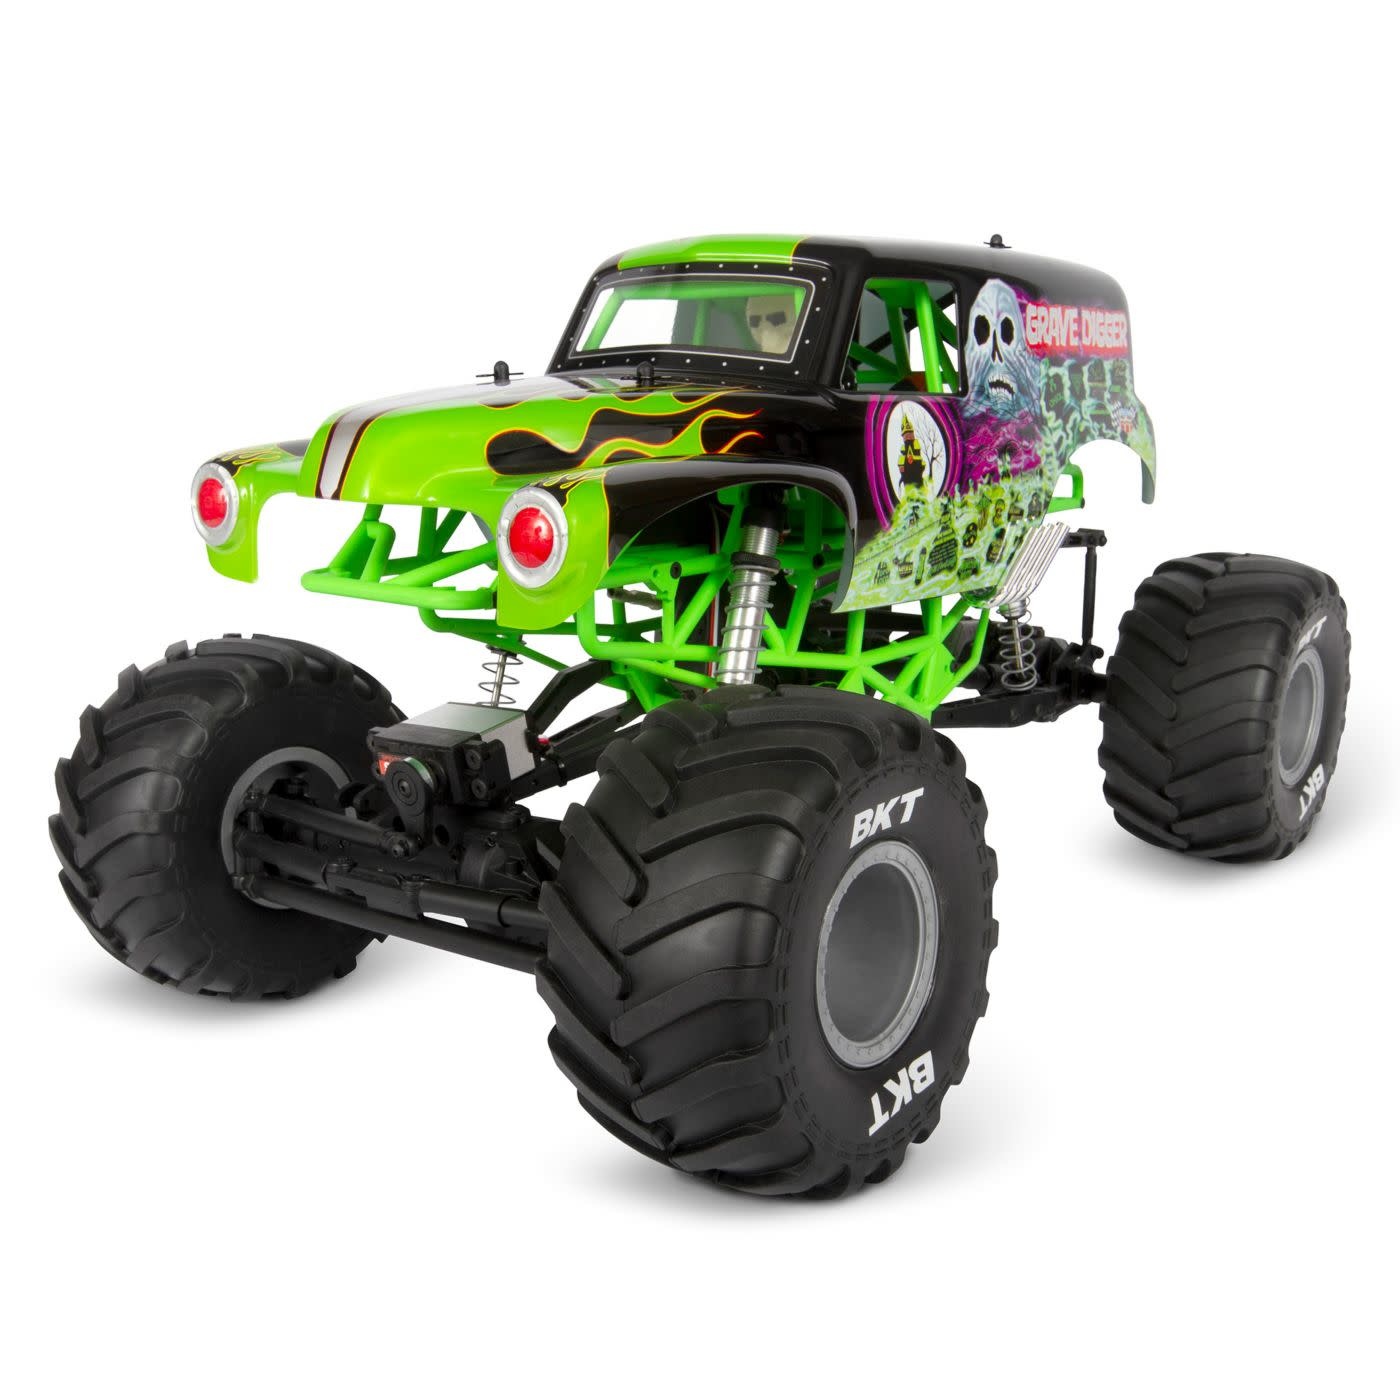 Axial AXI03019 SMT10 Grave Digger 1/10th 4wd Monster Truck RTR